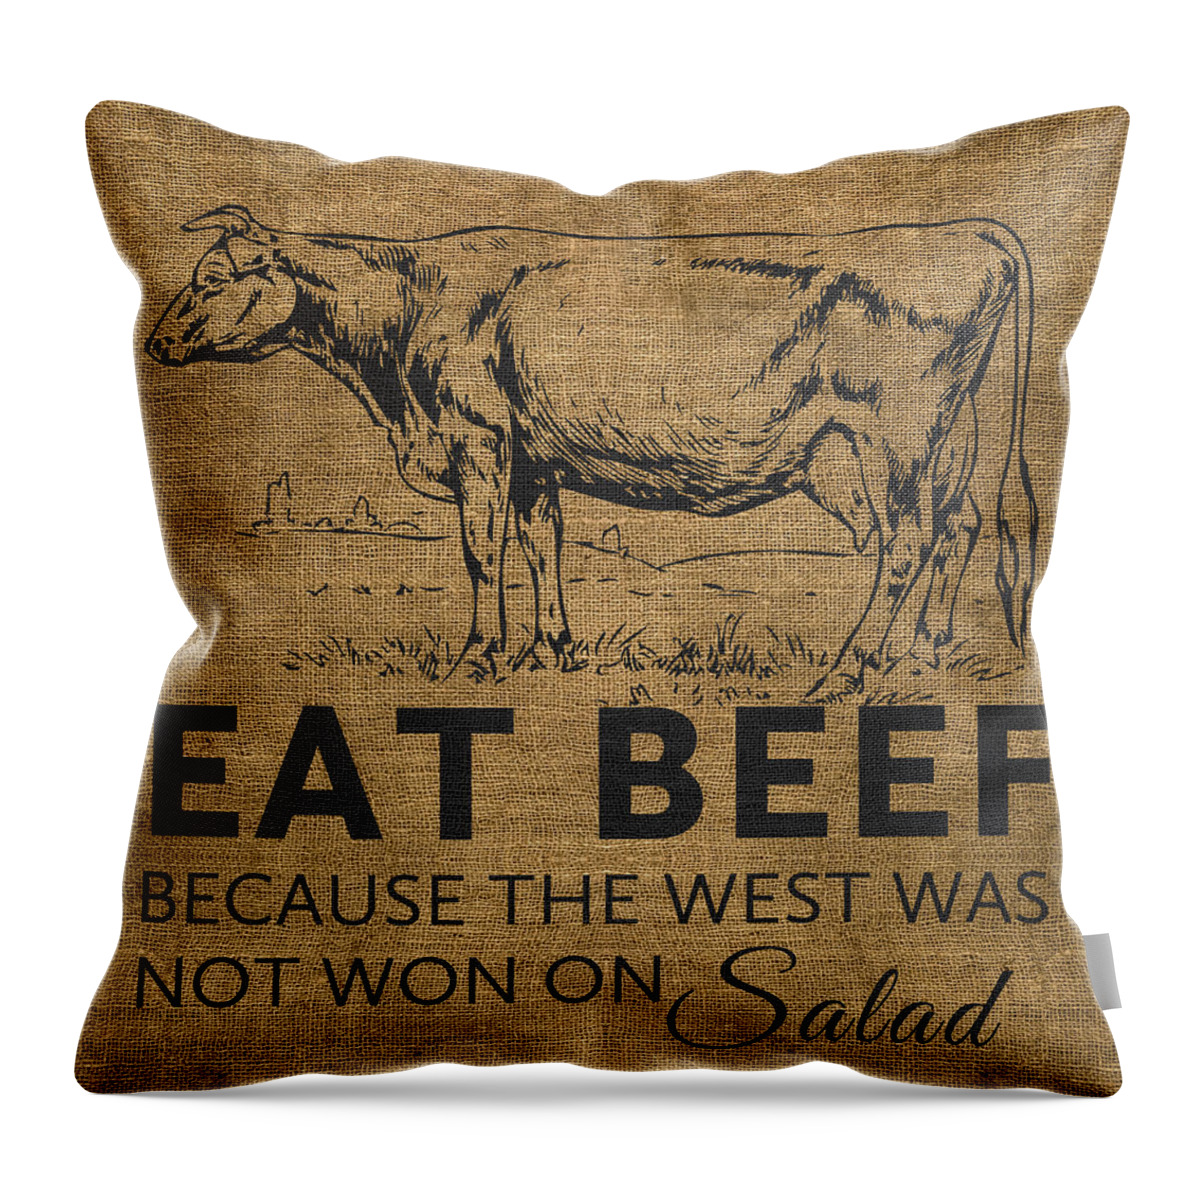 Illustration Throw Pillow featuring the digital art Eat Beef by Nancy Ingersoll